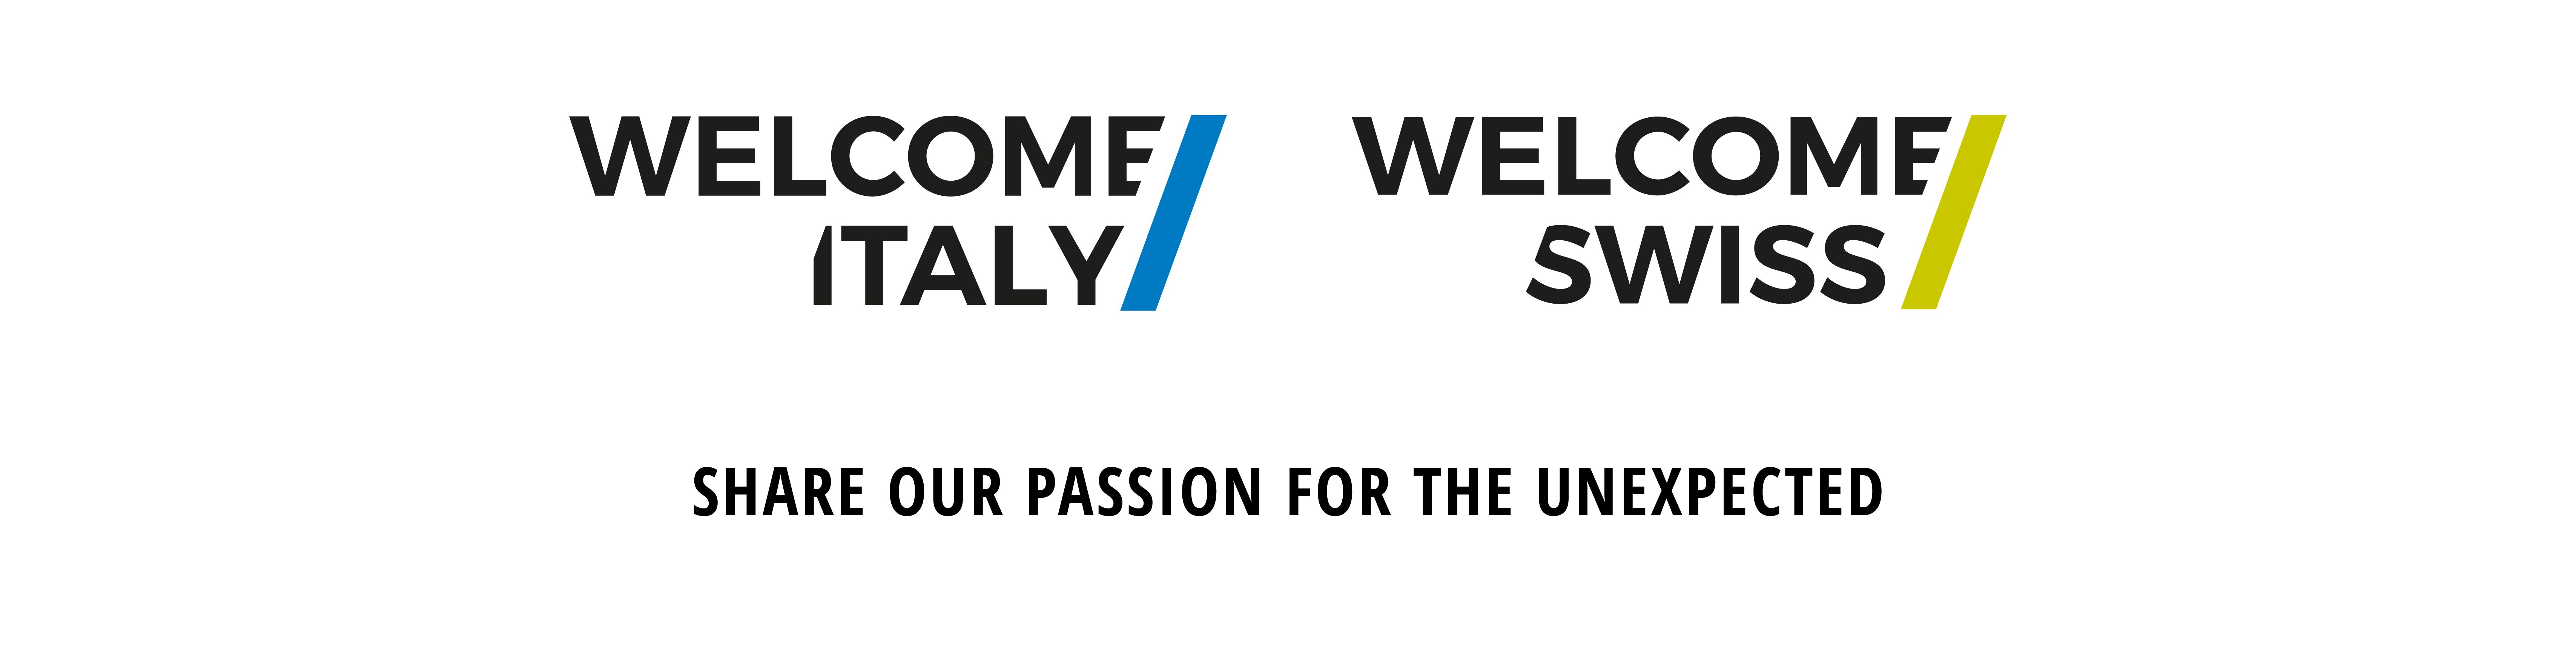 Welcome Swiss & Welcome Italy